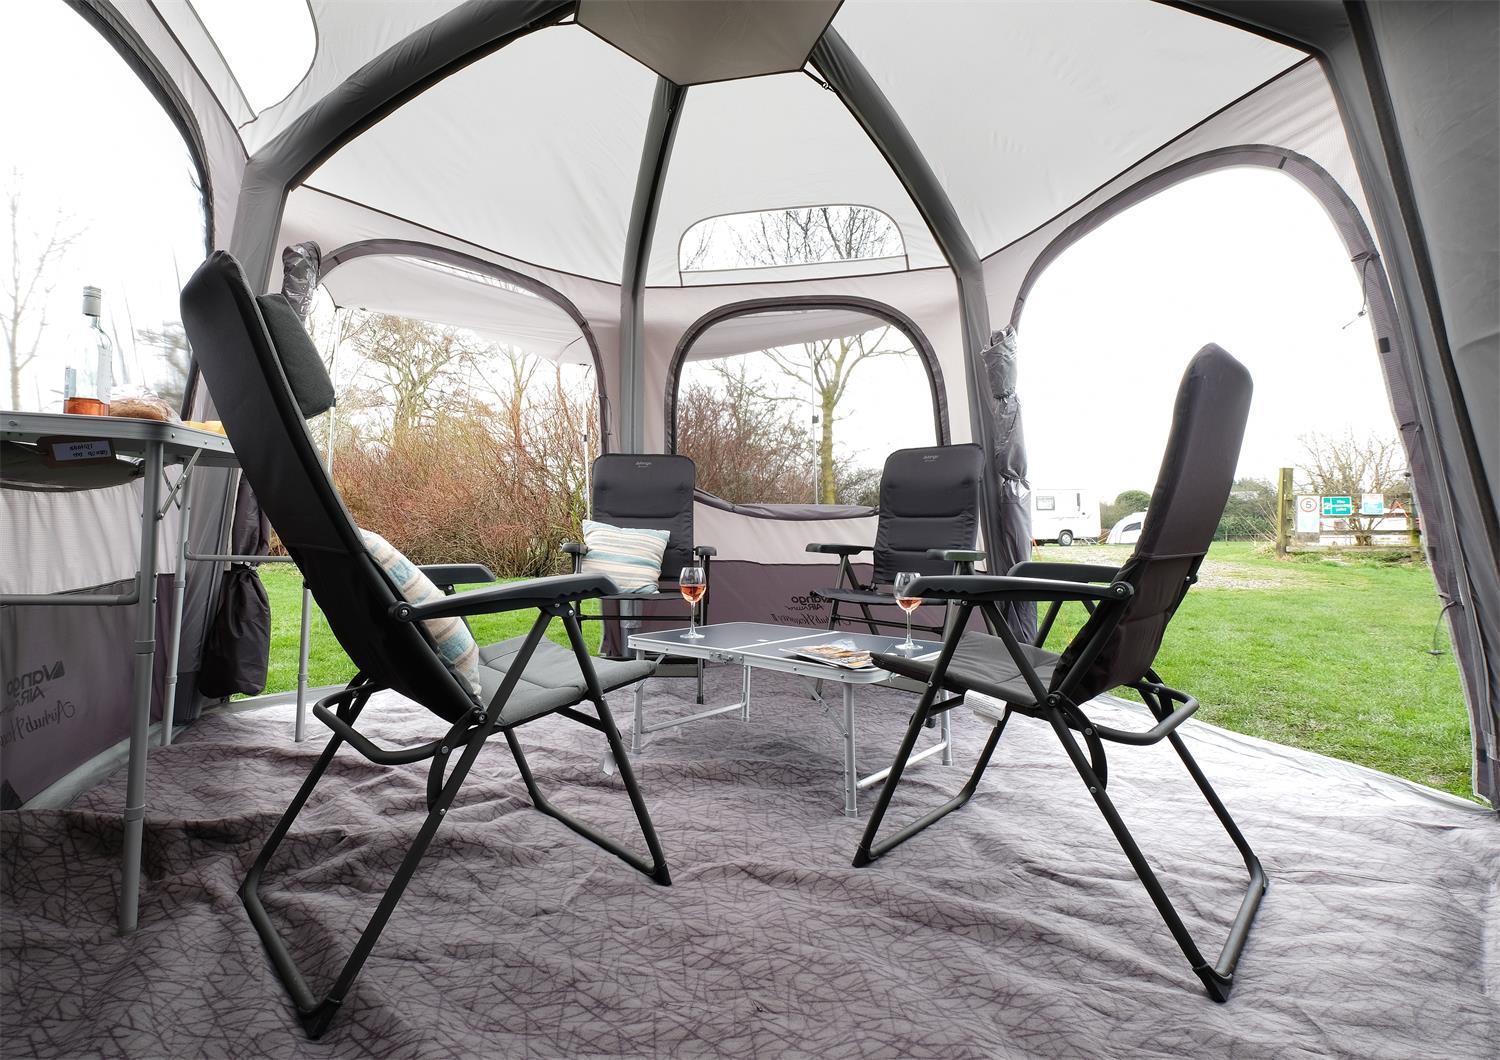 The Vango Airhub Hexaway awning has a unique shape.